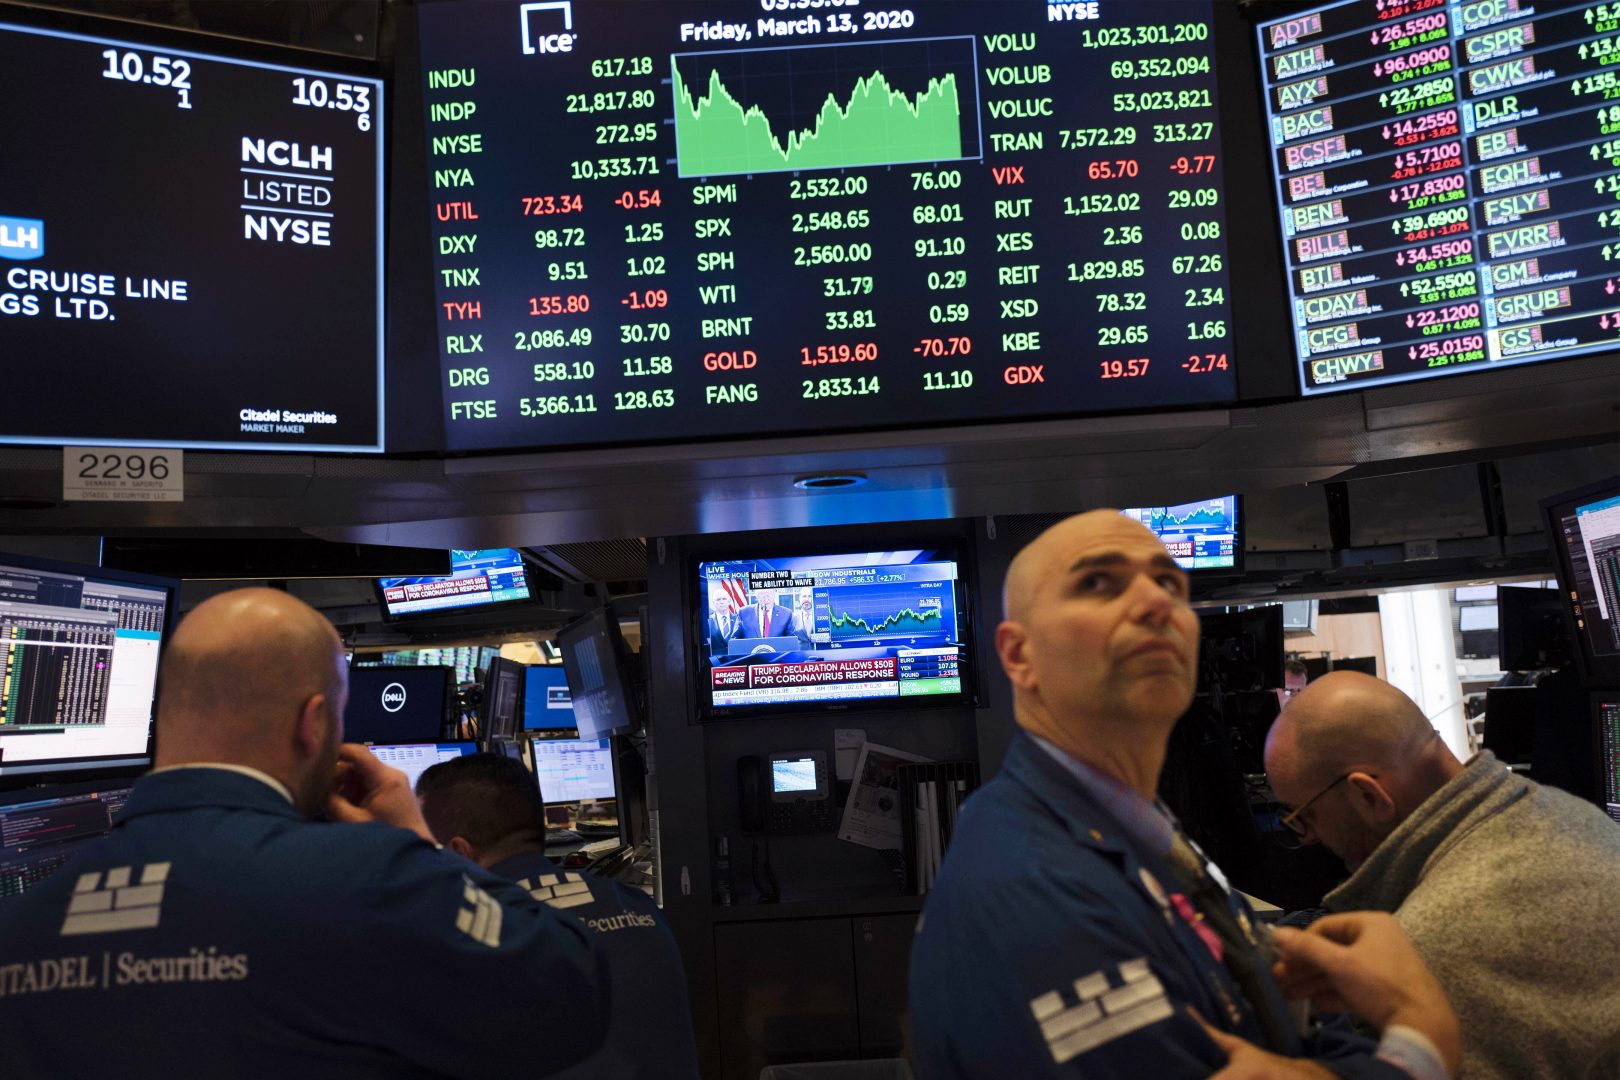 Traders listen at the New York Stock Exchange to President Donald Trump's televised speech from the White House, Friday, March 13, 2020, in New York. (AP Photo/Mark Lennihan)